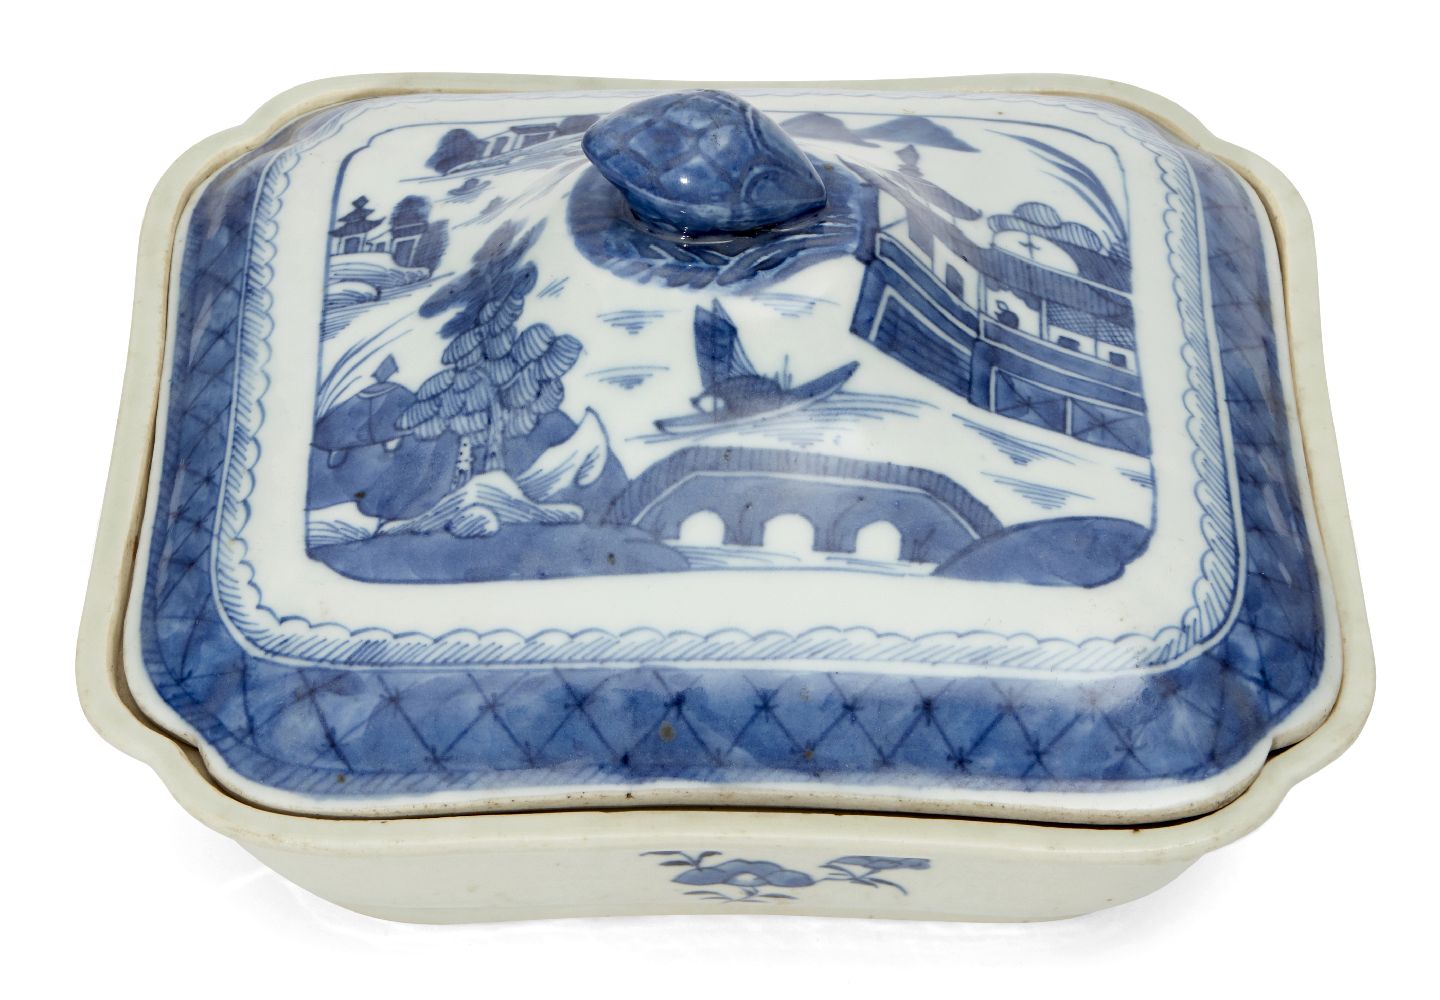 A Chinese export porcelain rectangular tureen and cover, late 19th century, painted in underglaze